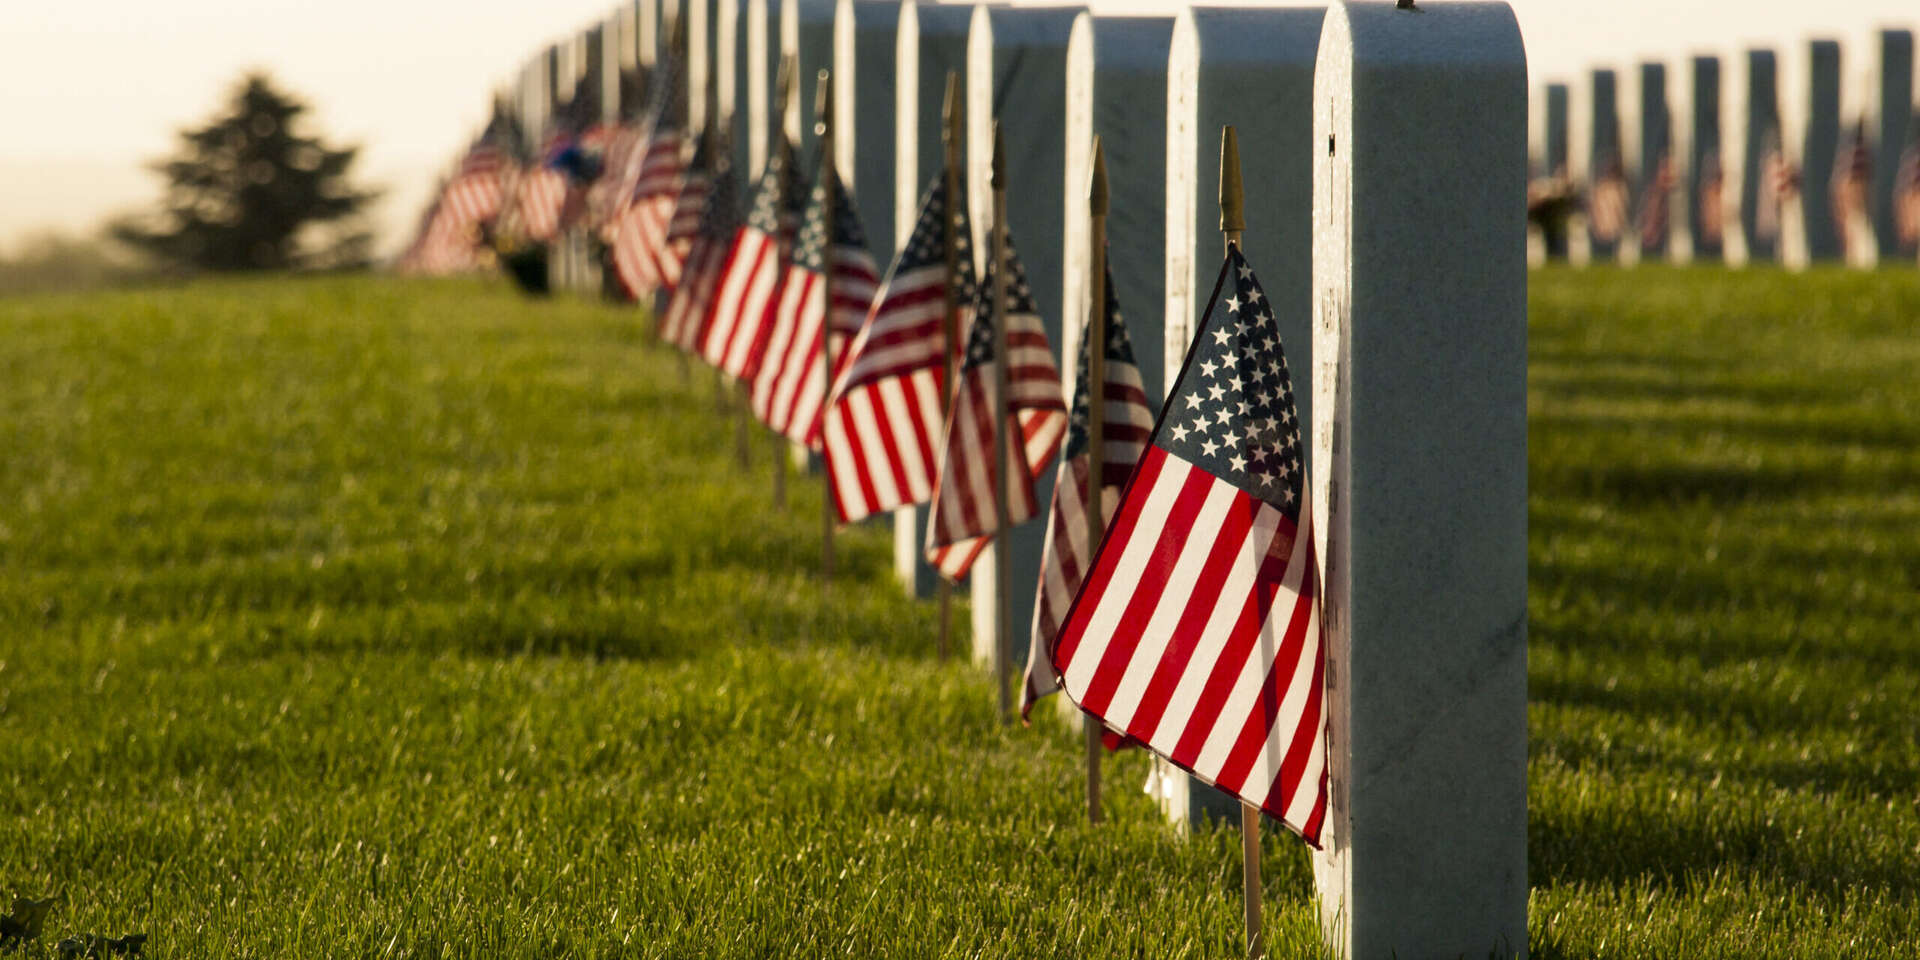 Why We Observe Memorial Day